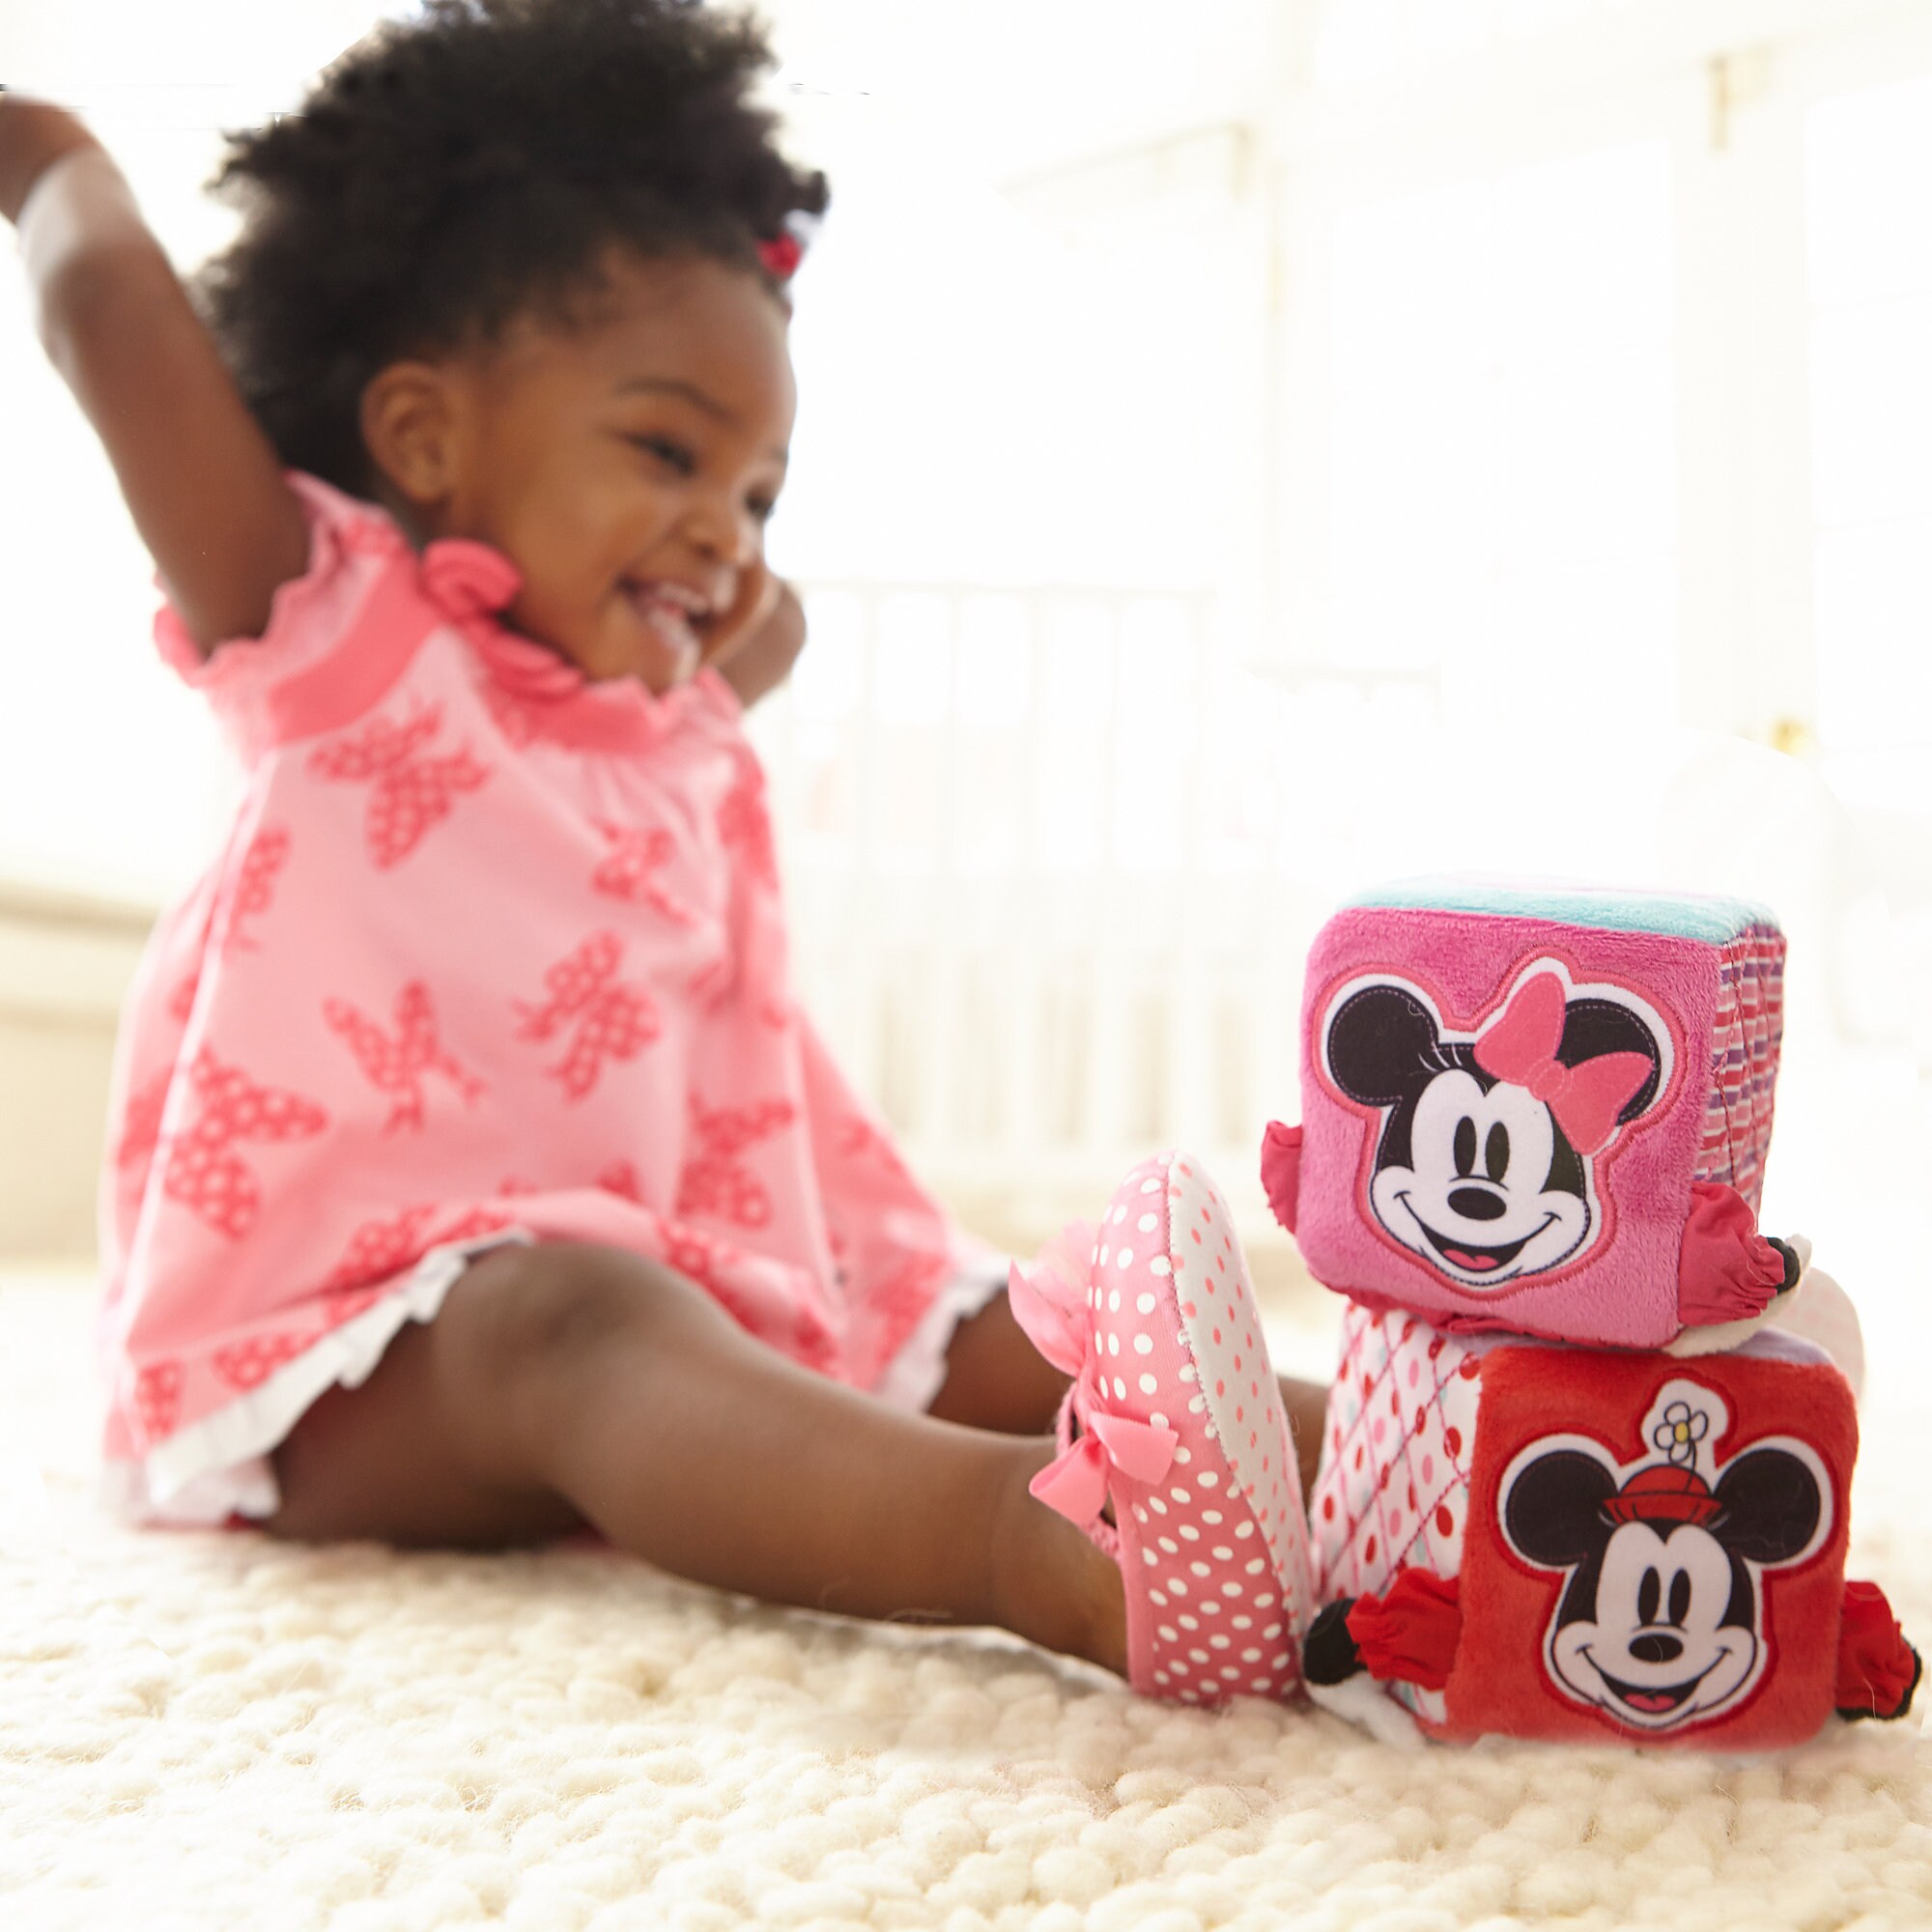 Minnie Mouse Soft Blocks for Baby